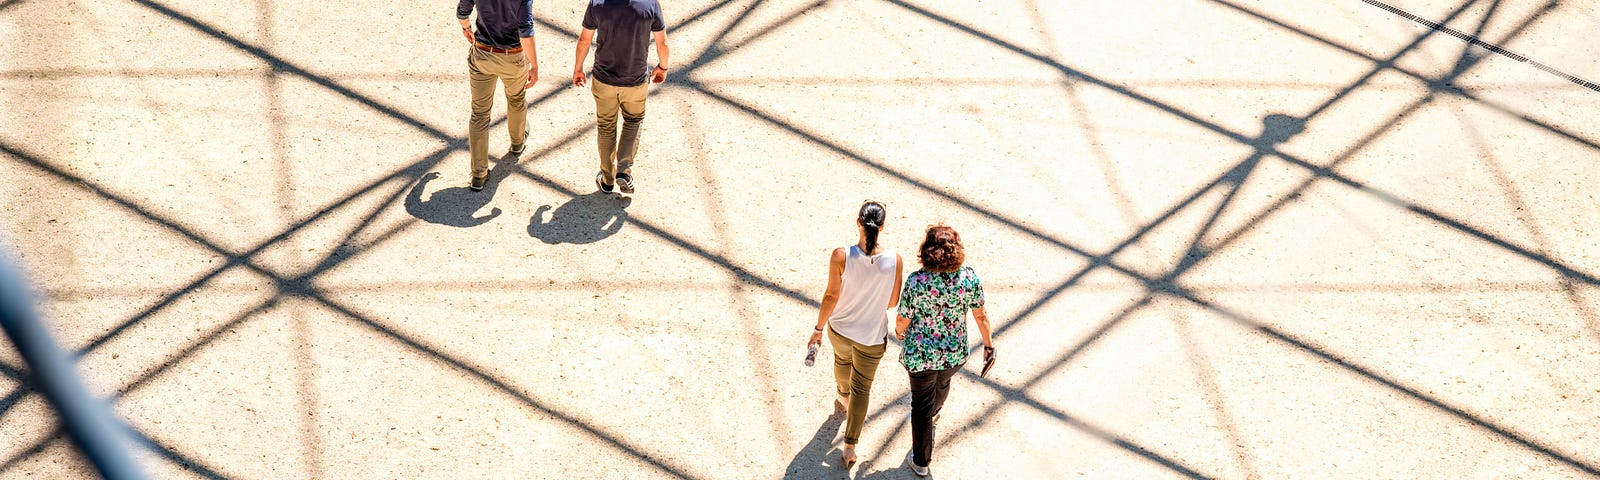 Two couples photographed from a distance, walking in an open area where long shadows cast from an unseen source create dark parallel lines on the ground.